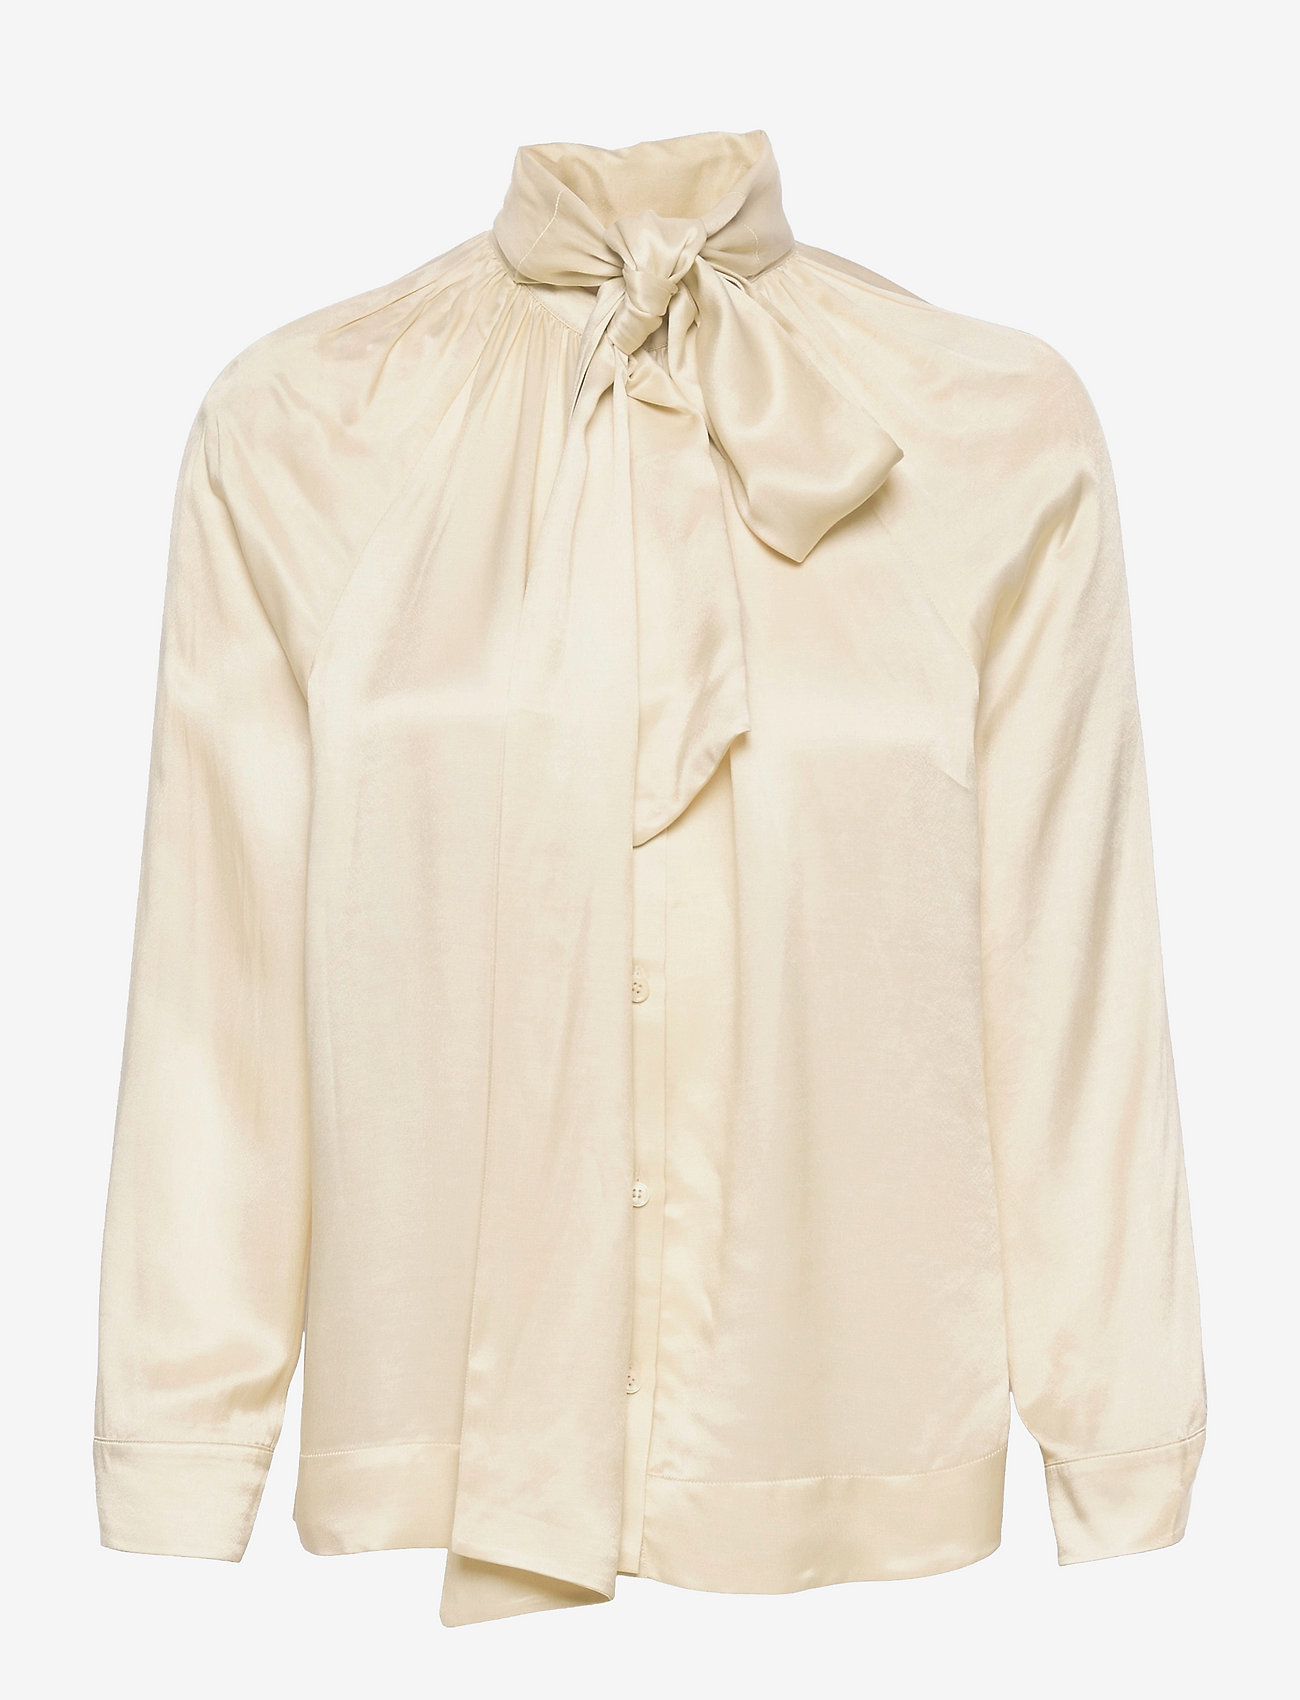 RODEBJER - RODEBJER RORIE - long-sleeved shirts - bone - 0